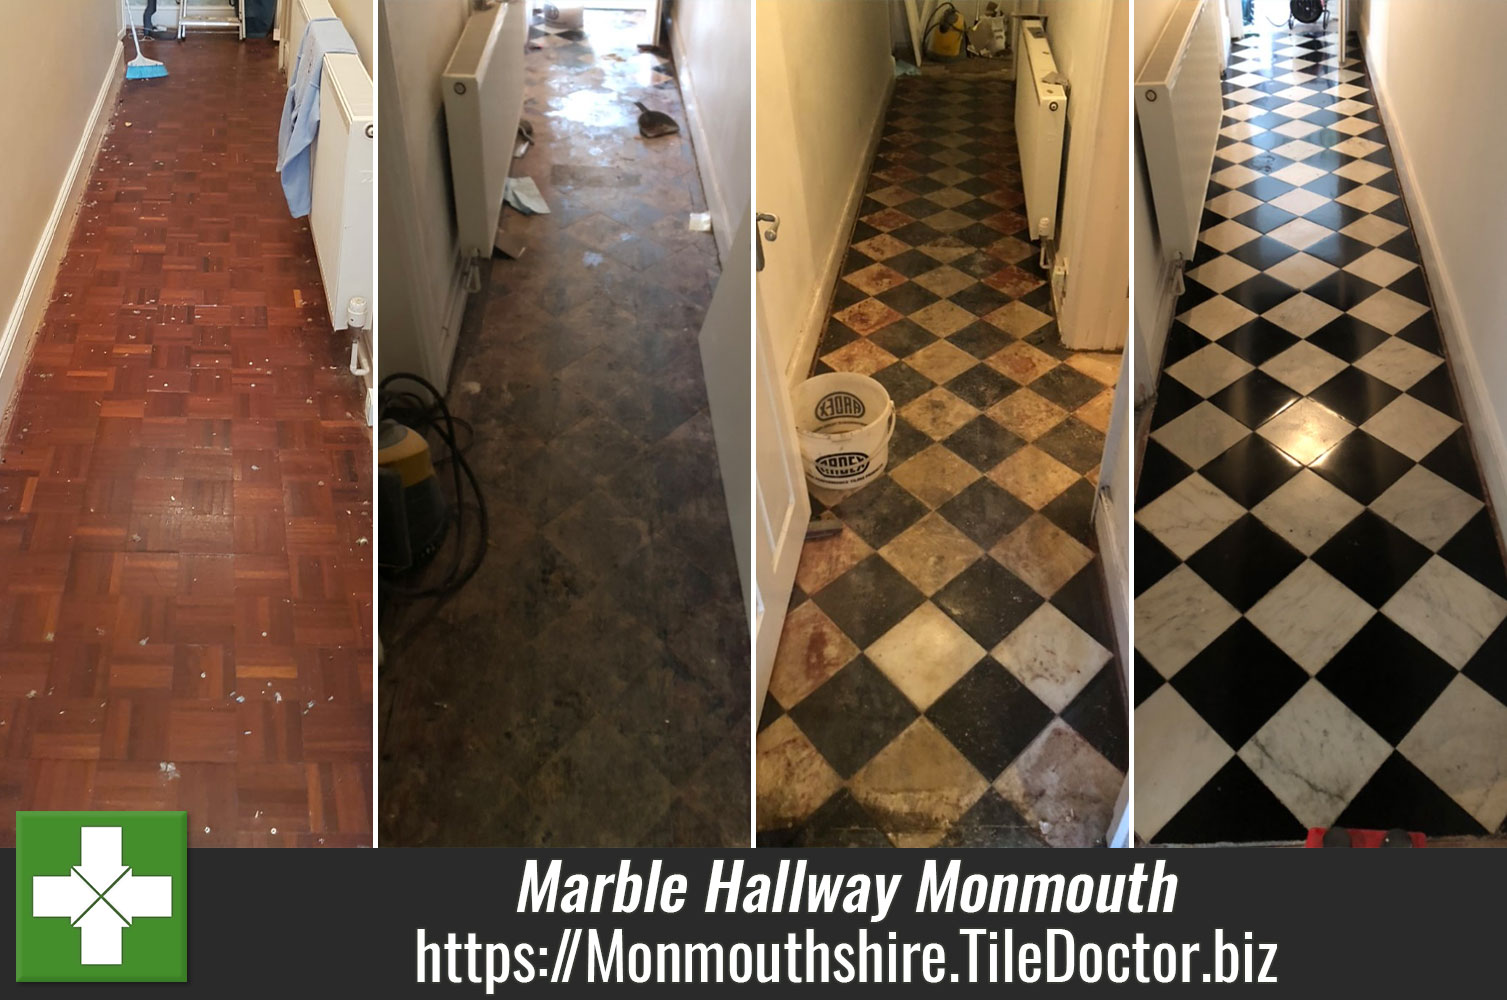 Removing Bitumen from Classic Marble Floor Tiles in Monmouth with Tile Doctor Remove and Go